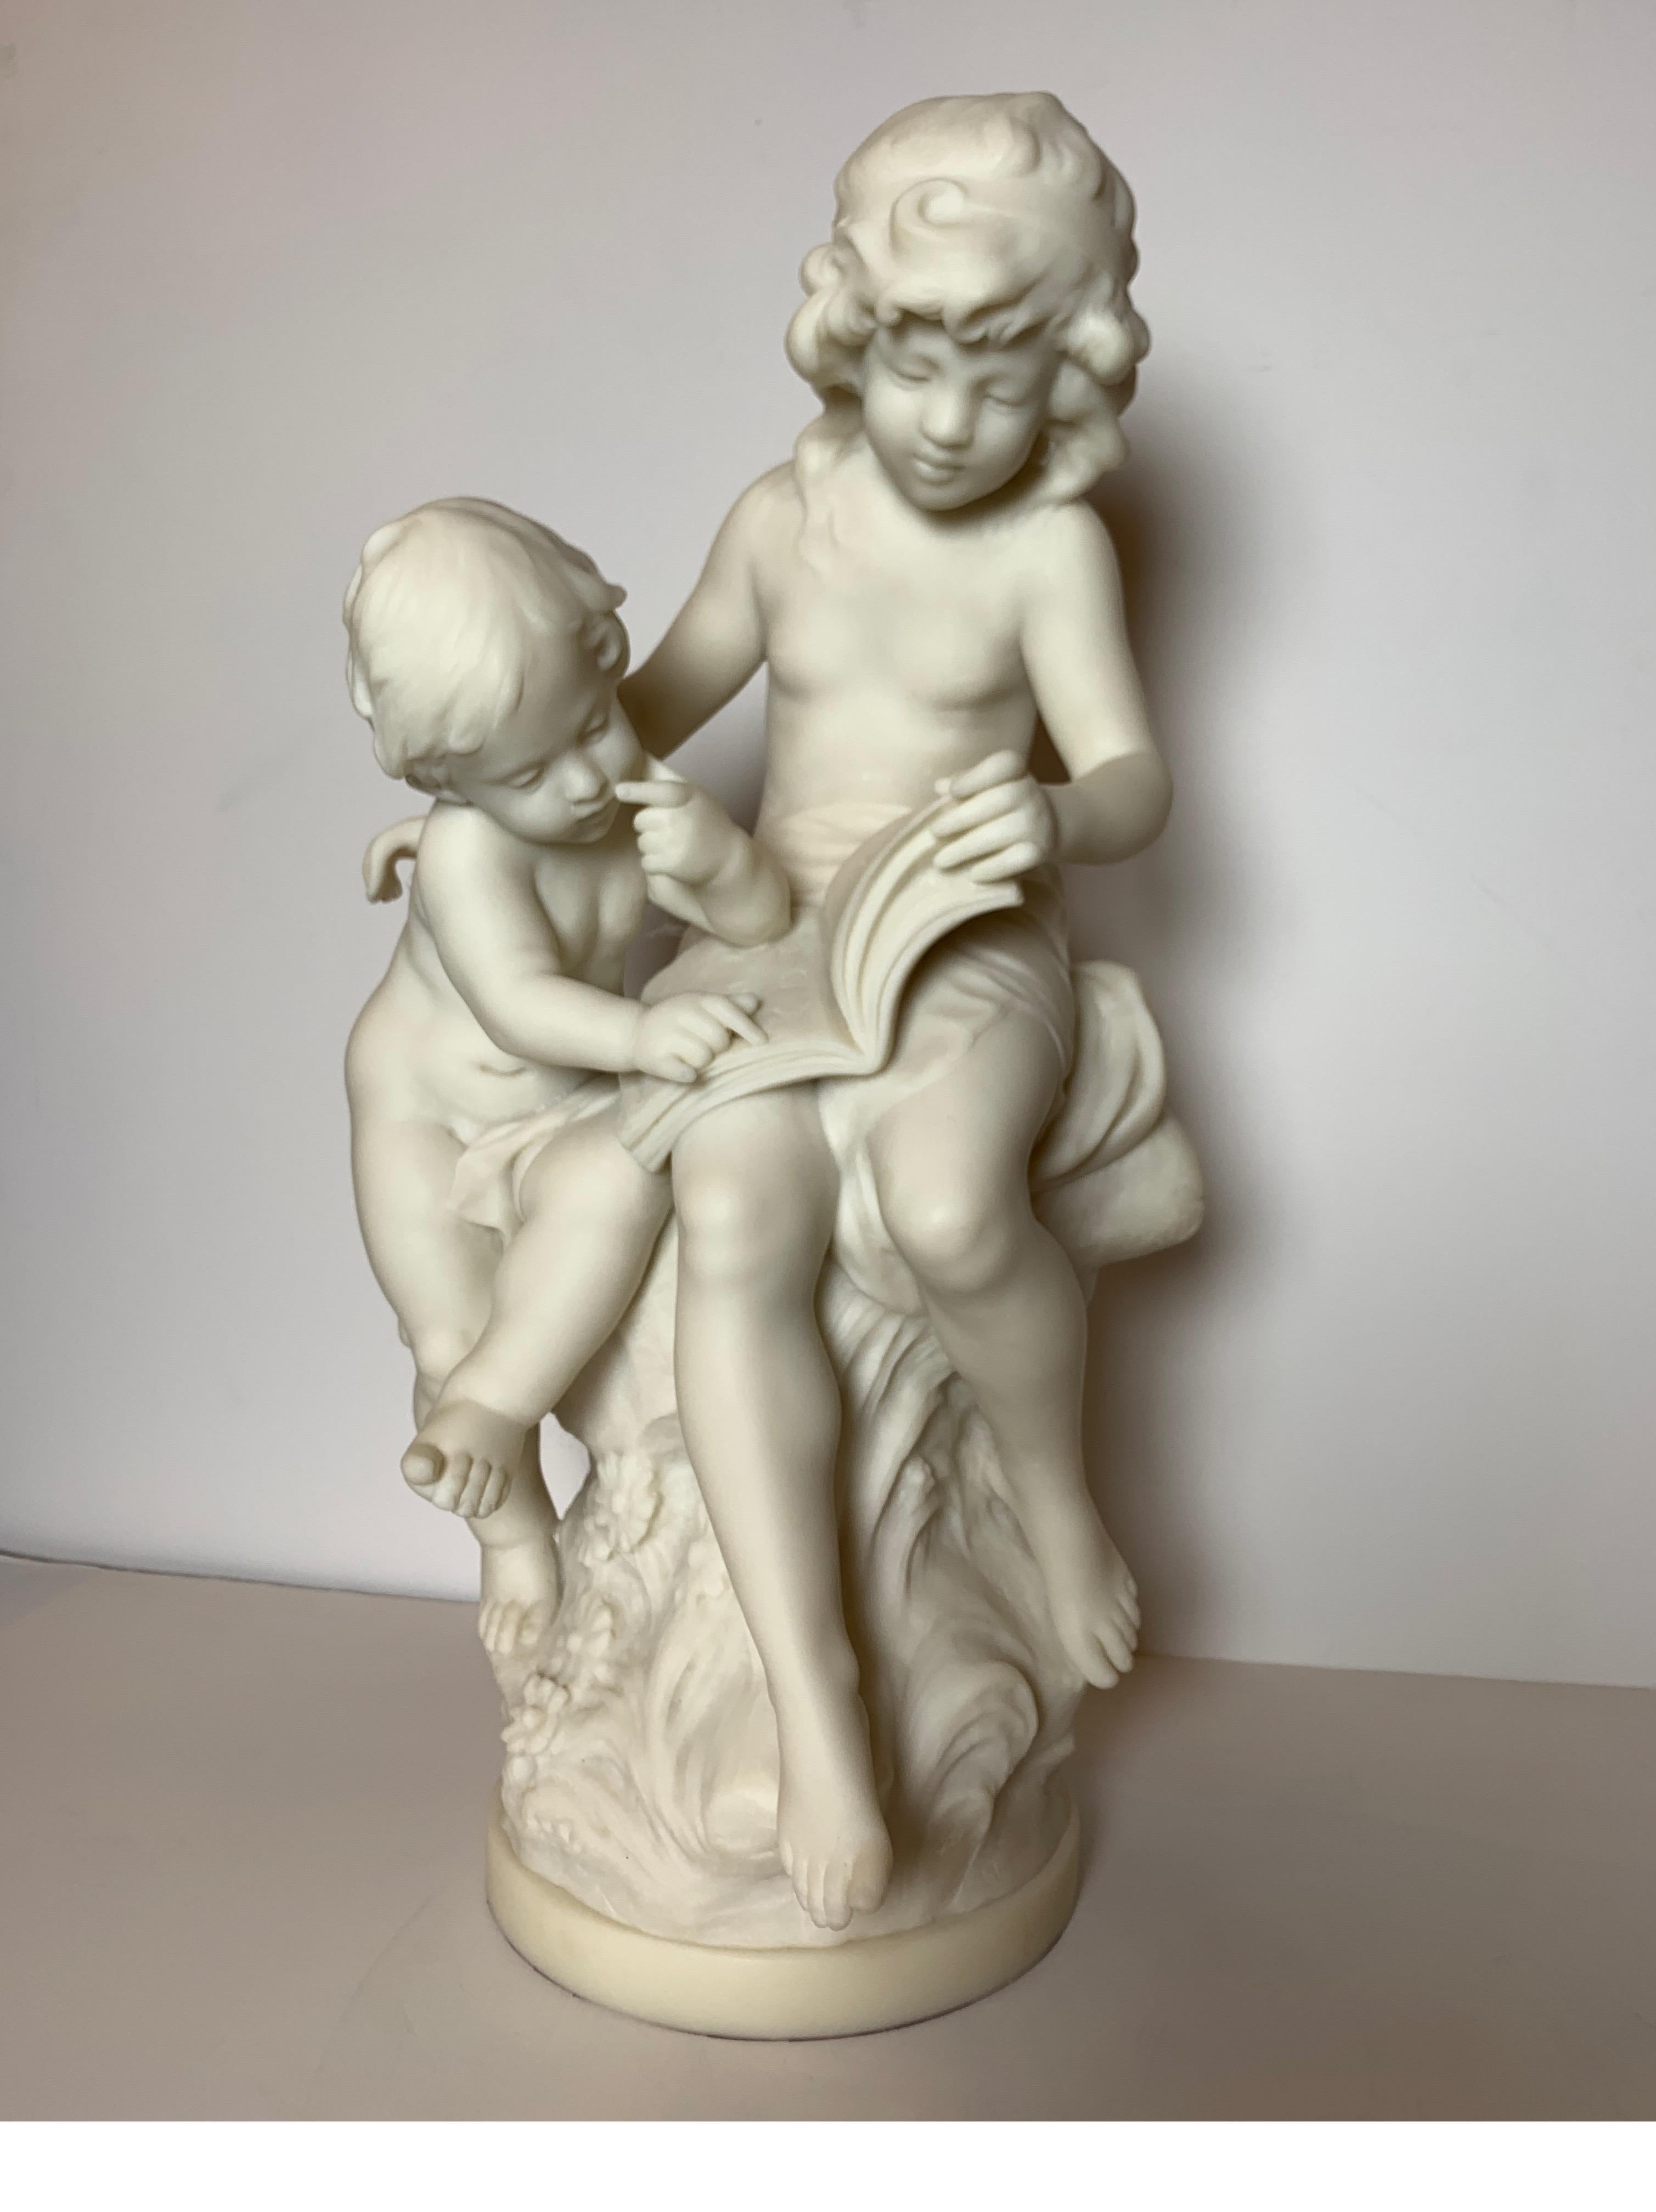 Solid marble sculpture of siblings reading on circular base. The sculpture with two children sitting on a tree stump with book, signed on base Auguste Moreau, 1837-1917.